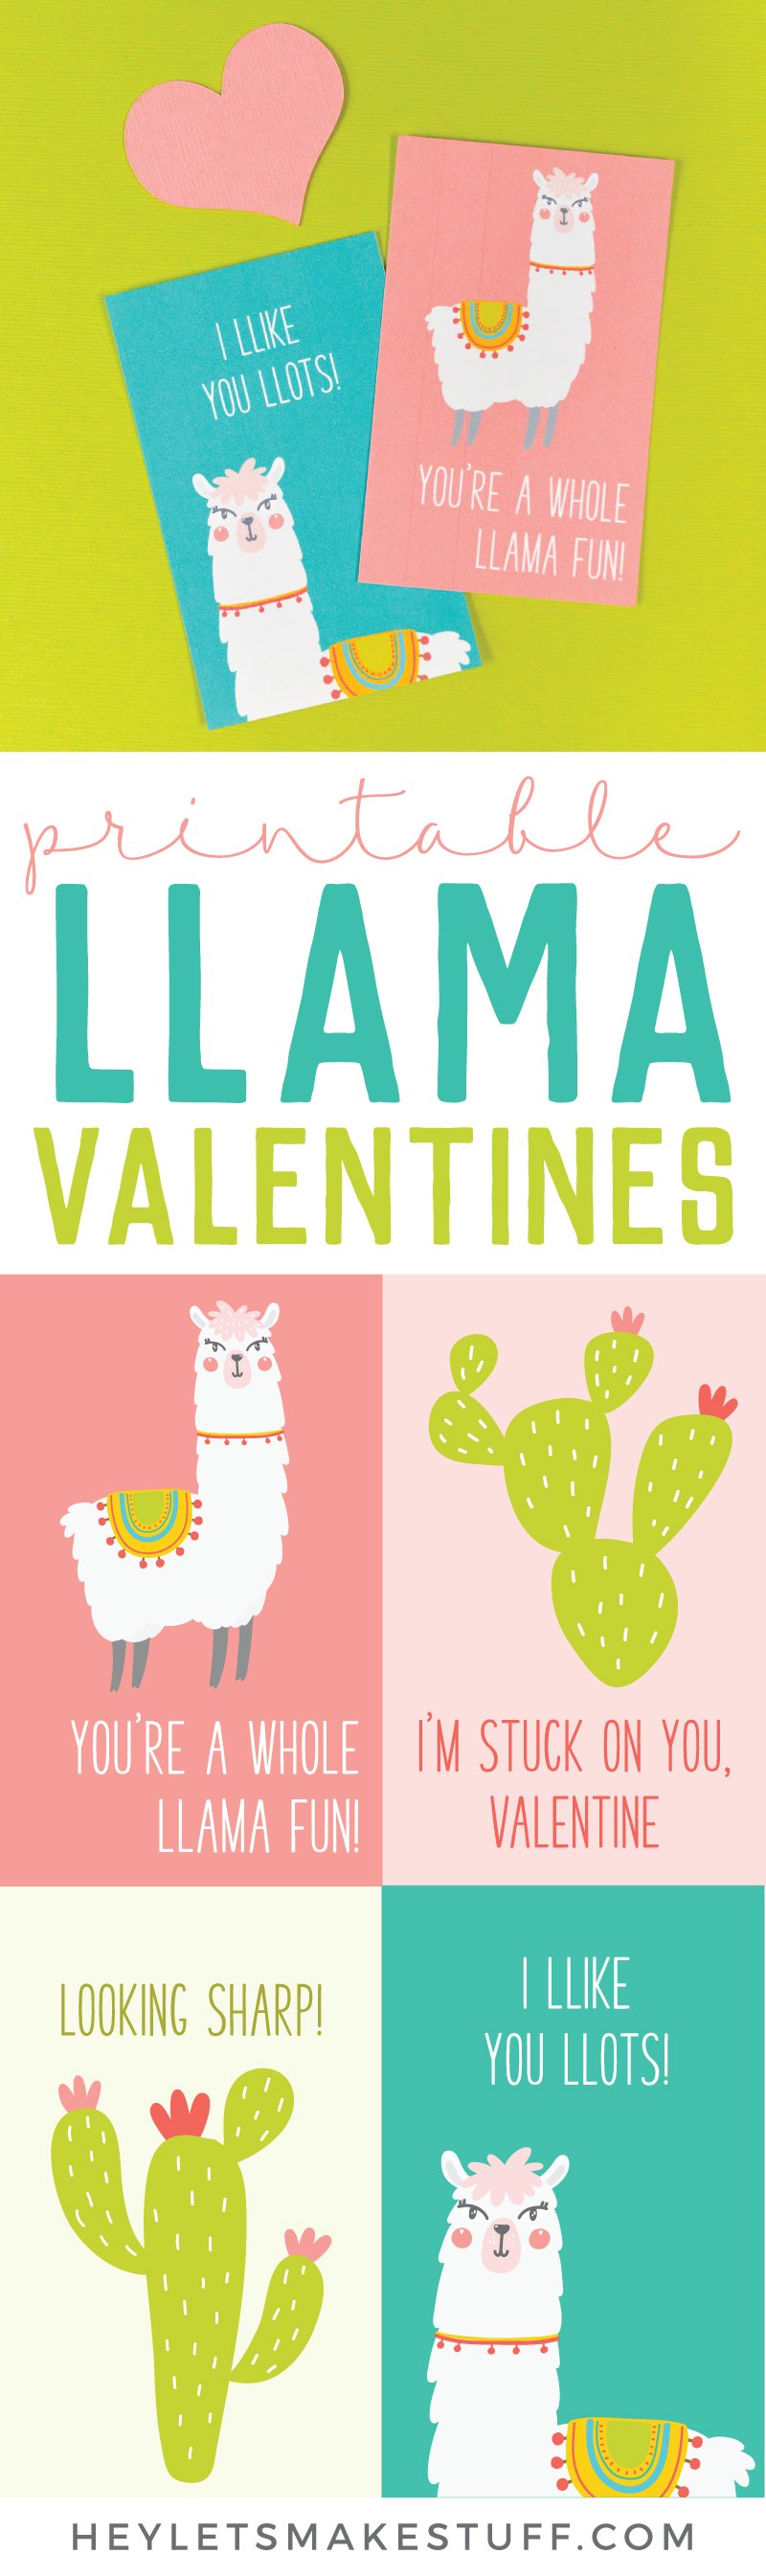 Cactus and Llama Valentine\'s Day cards that say, \"You\'re a Whole Llama Fun\", \"I\'m Stuck on You, Valentine\", \"Looking Sharp!\" and \"I Like You Llots!\" with advertising for printable llama valentine\'s from HEYLETSMAKESTUFF.COM